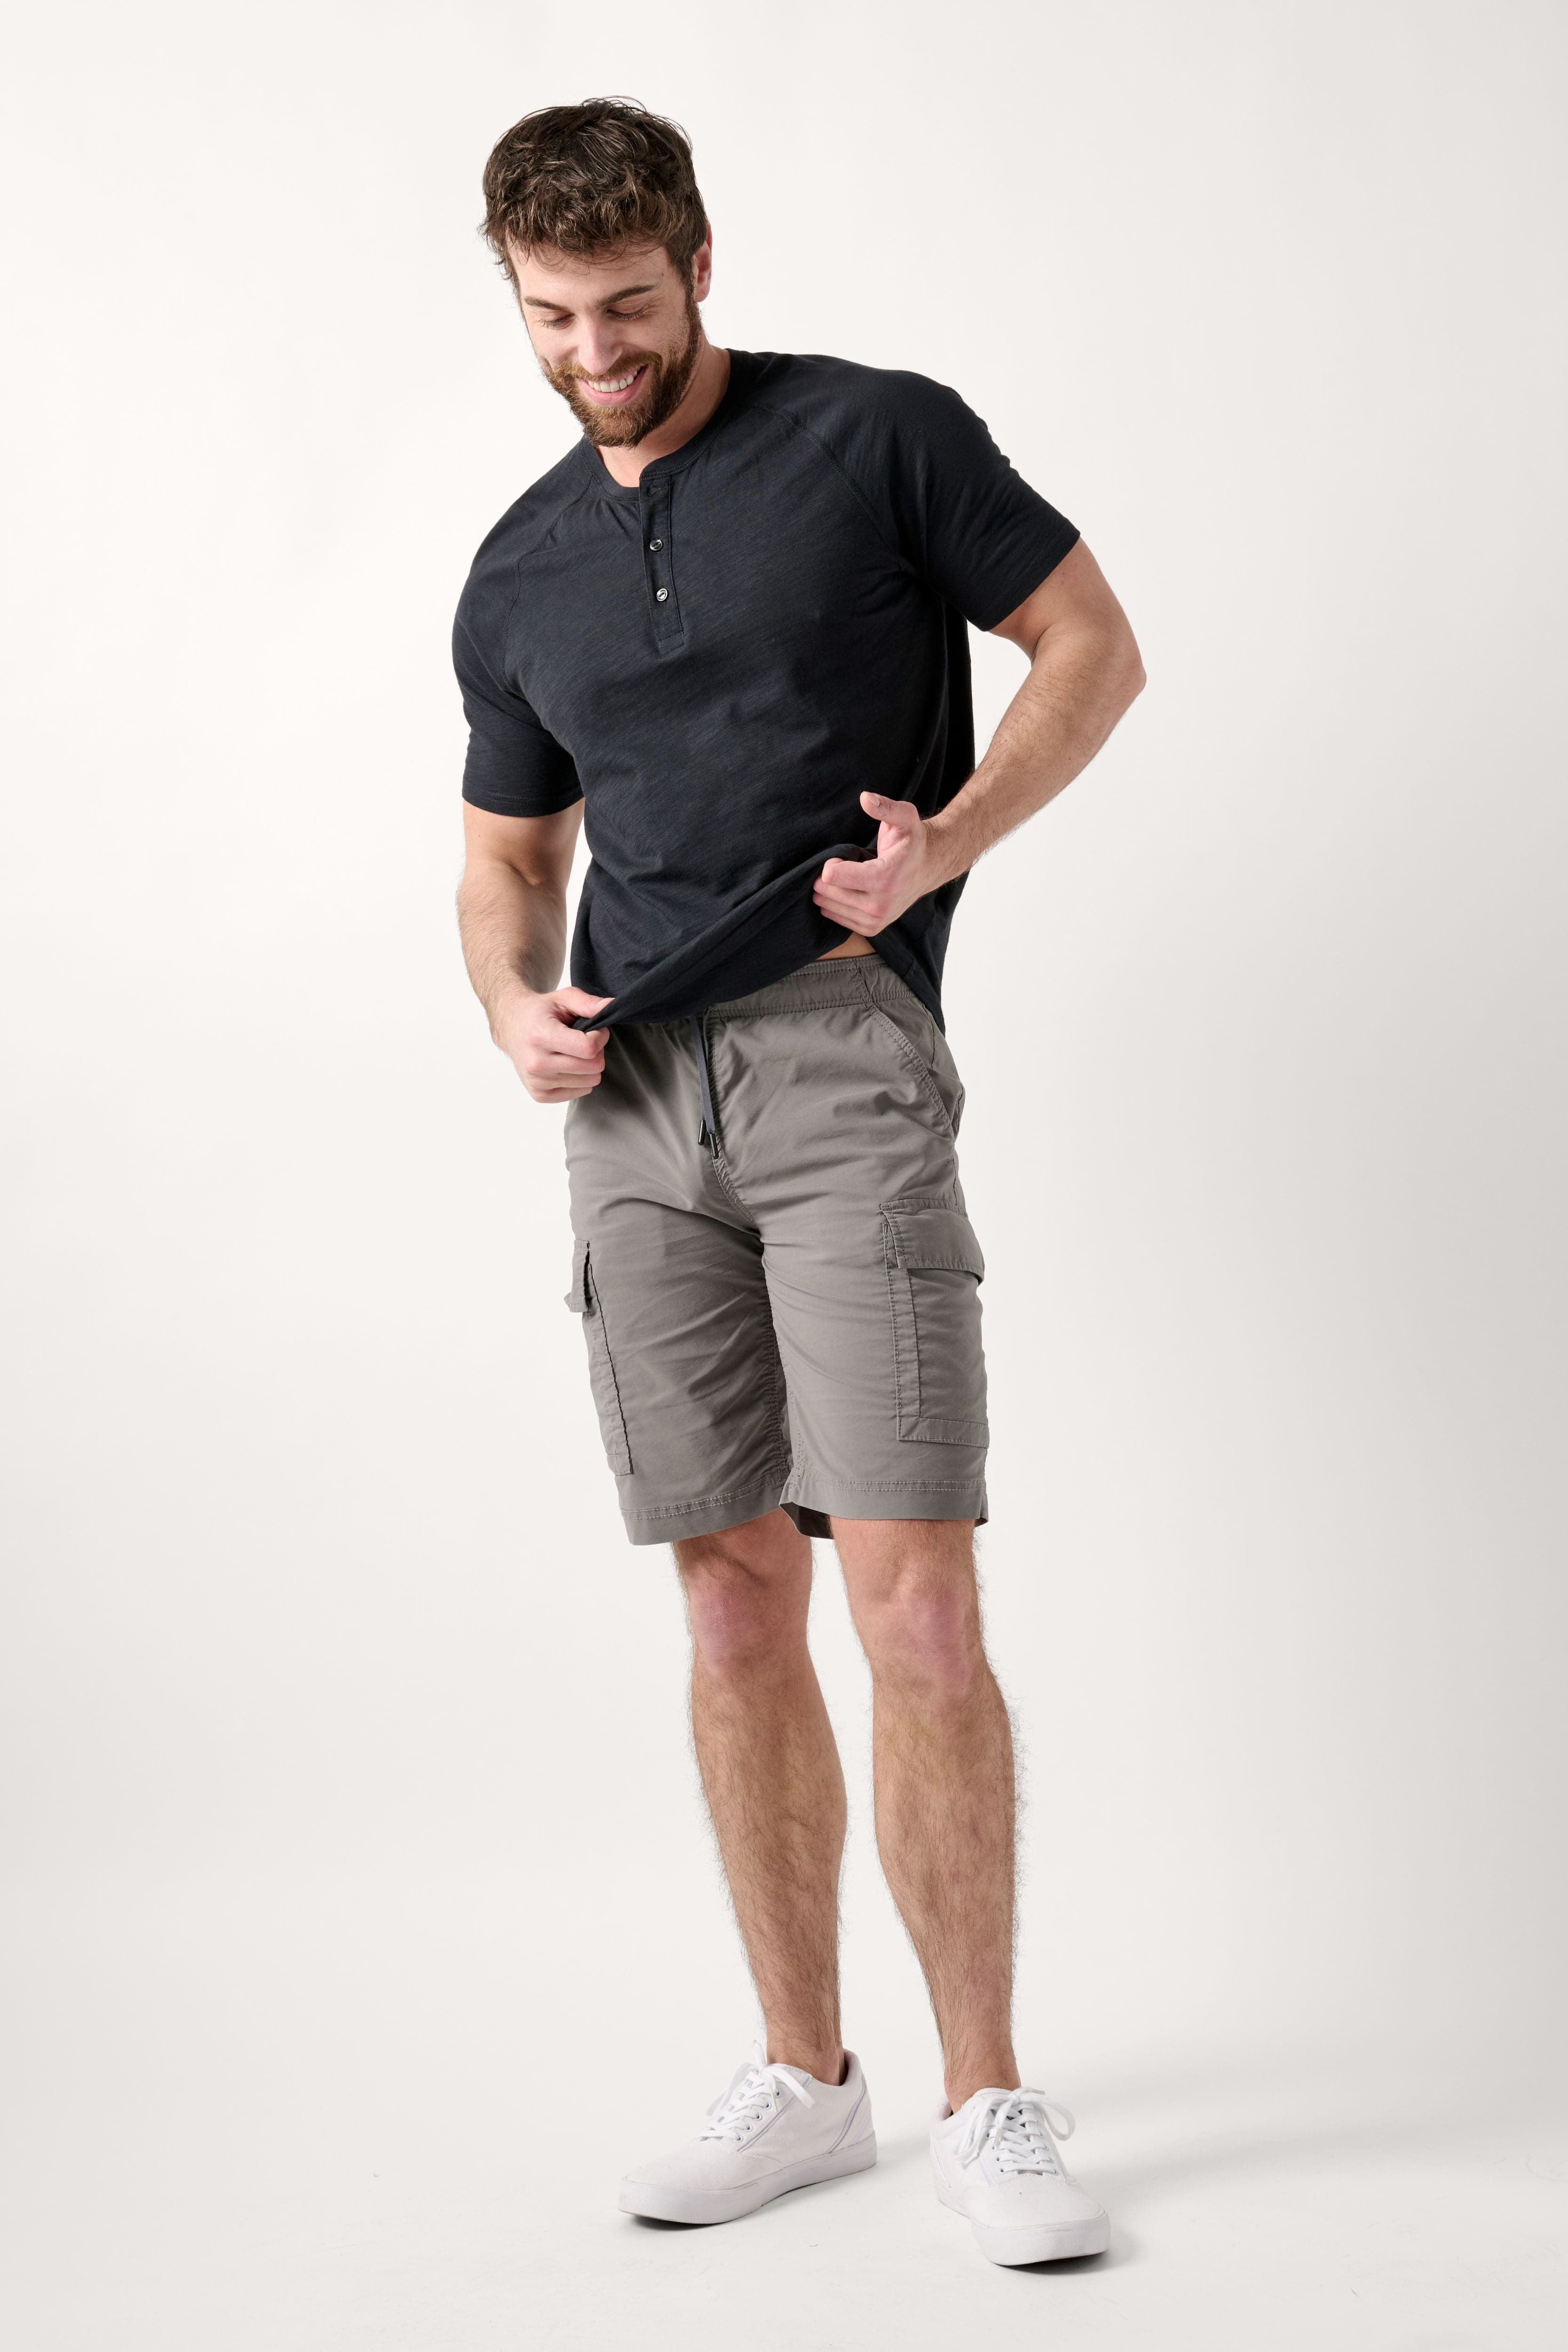 Male model dressed in the WEARFIRST Pacer Cargo Short with a drawstring in Gargoyle